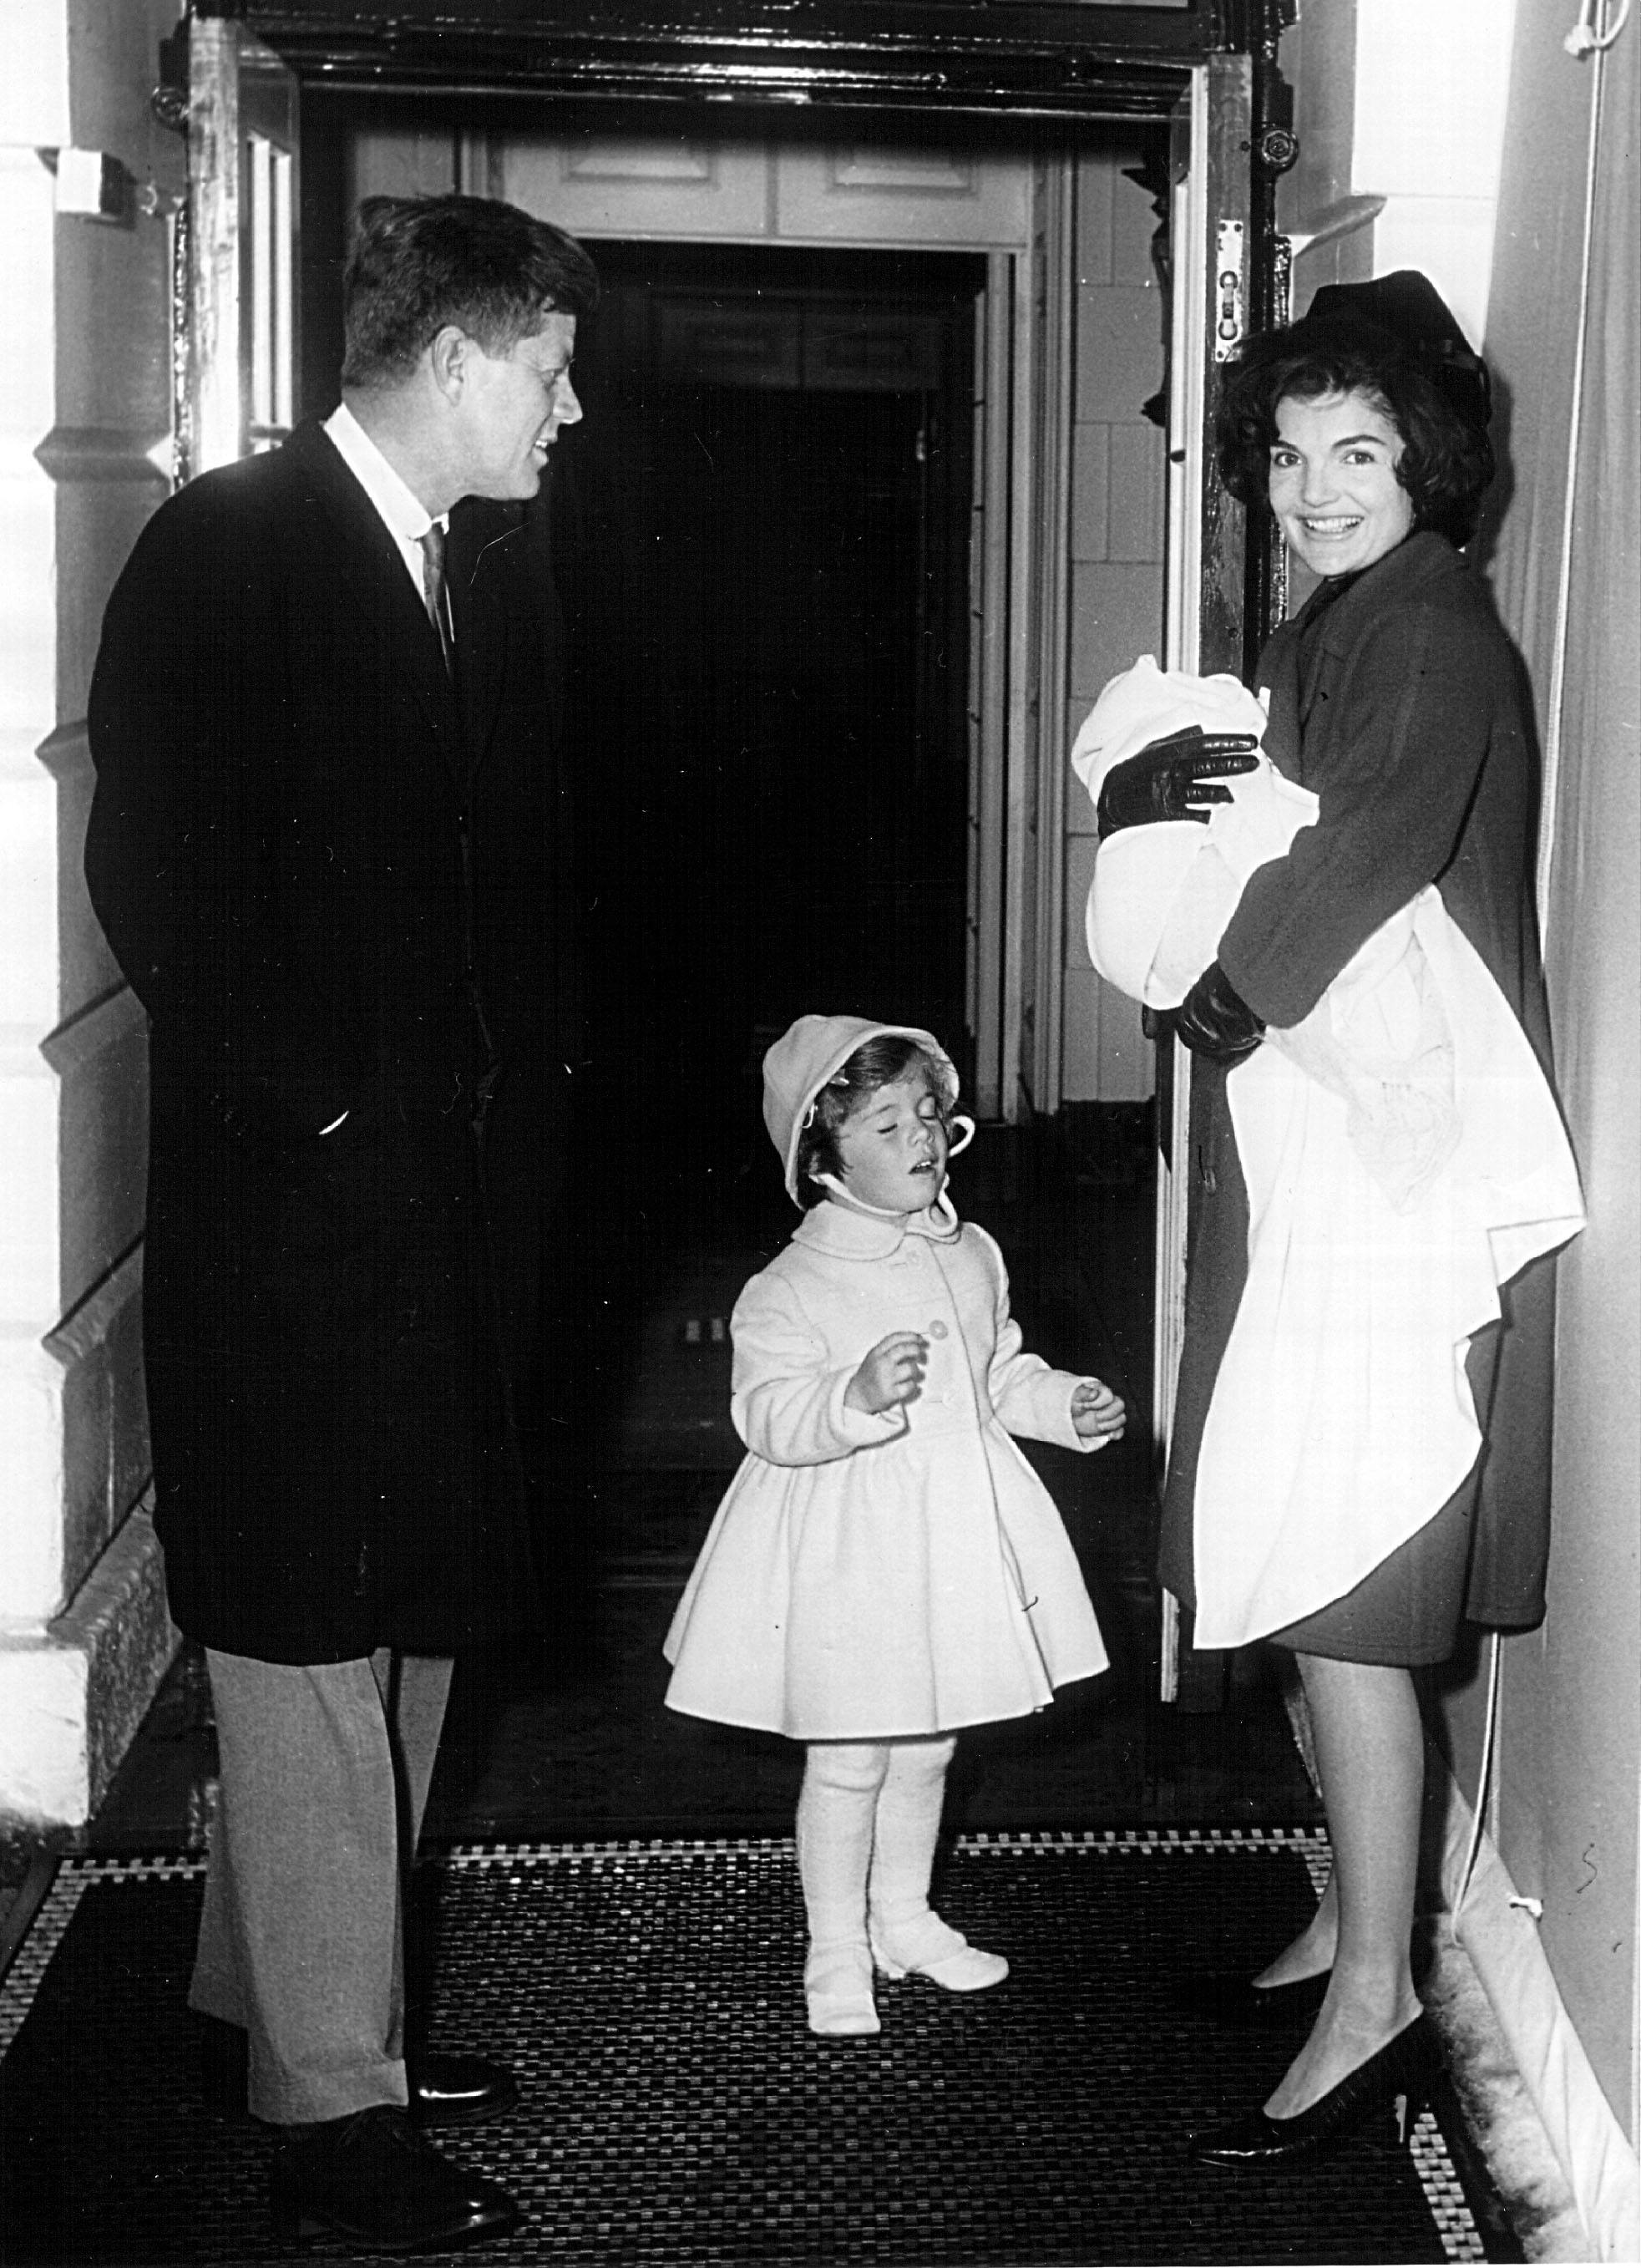 The Kennedy family arrives at the White House